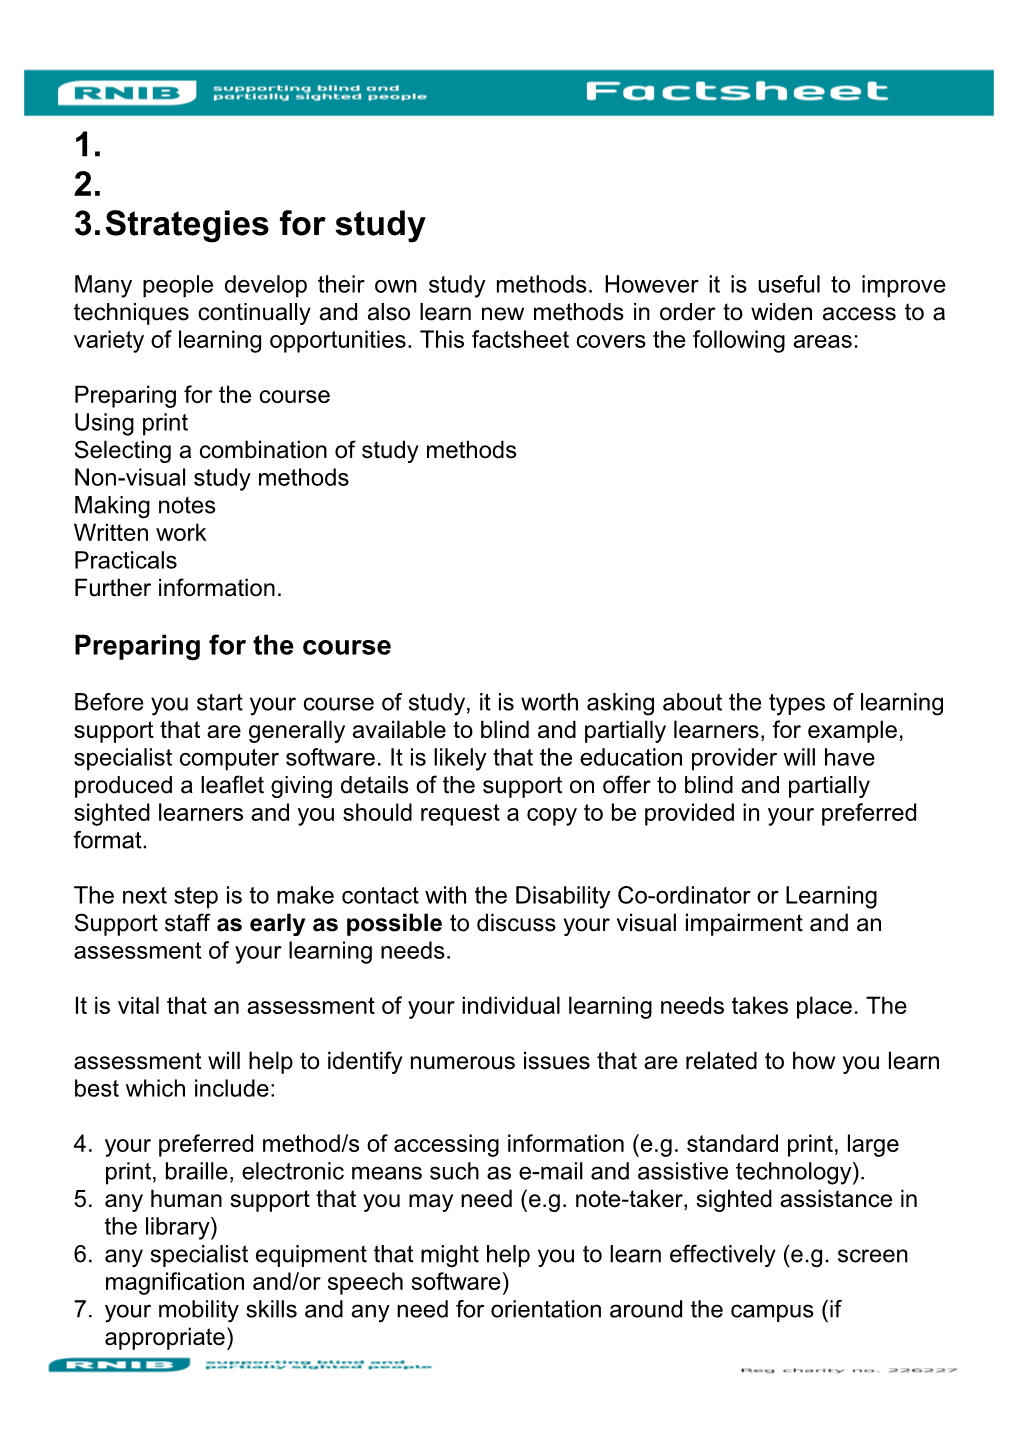 Strategies for Study